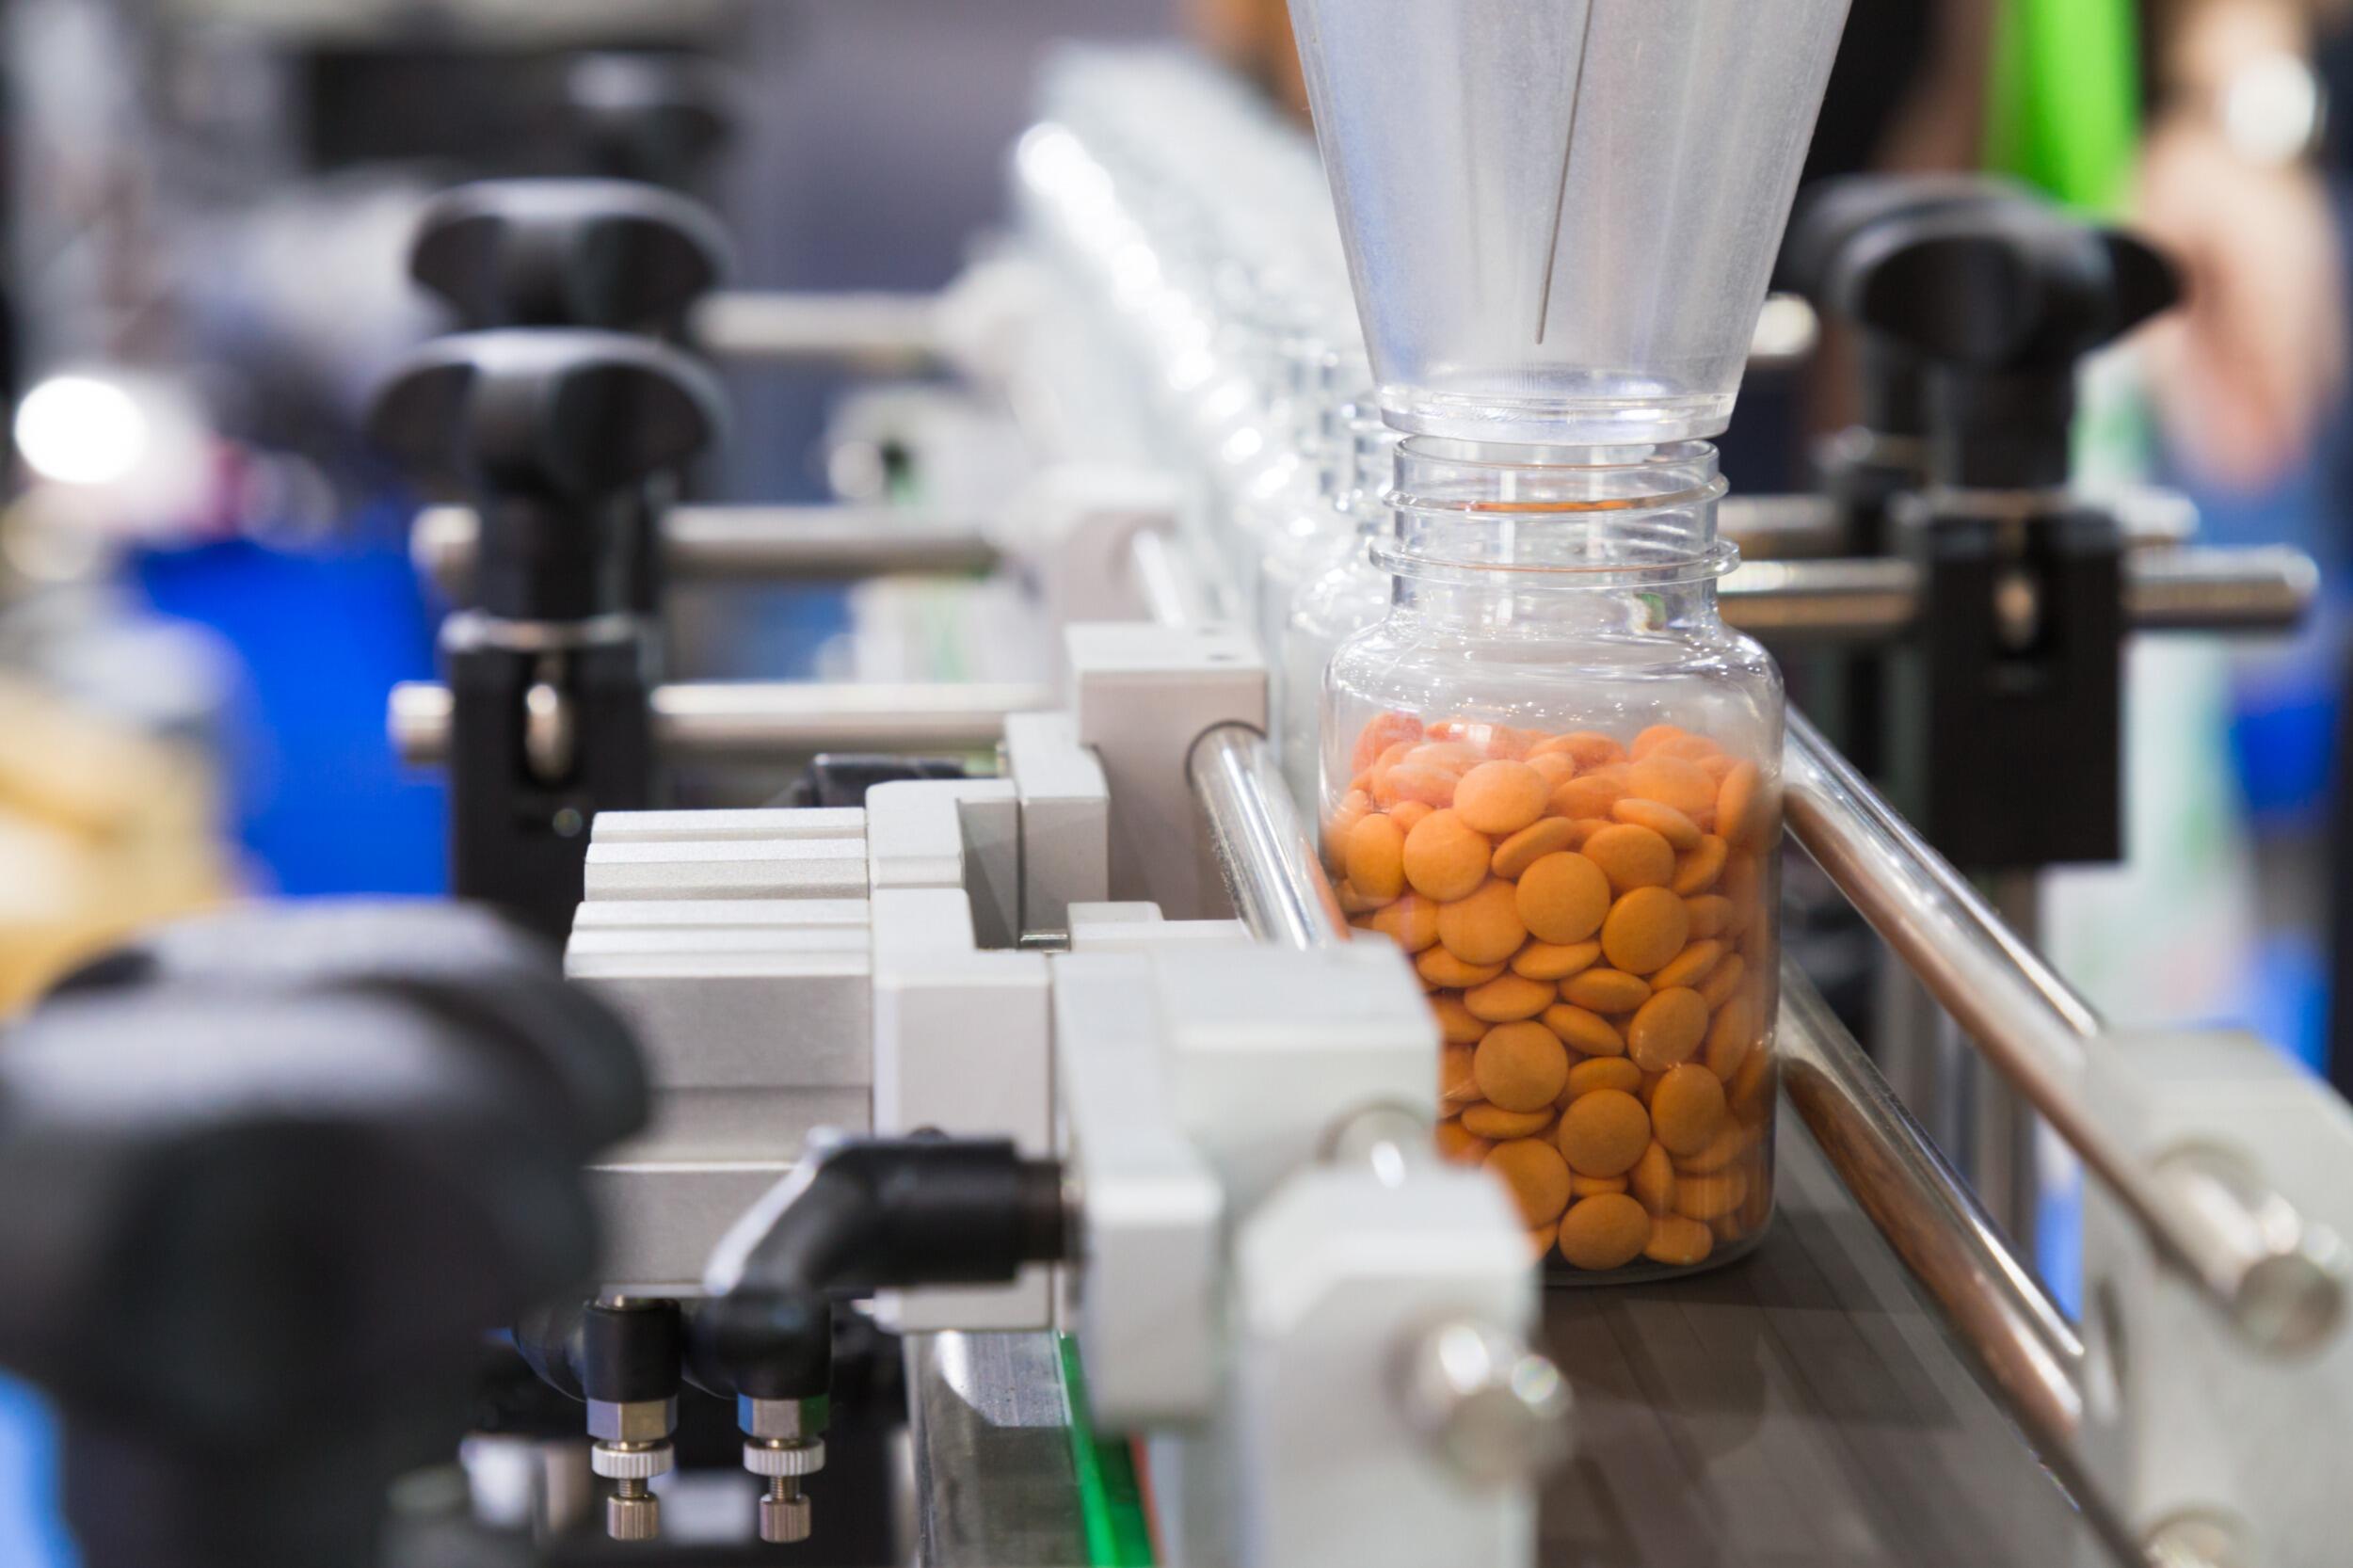 A manufacturing facility produces pharmaceutical products, including a bottle of orange pills, on a machine.